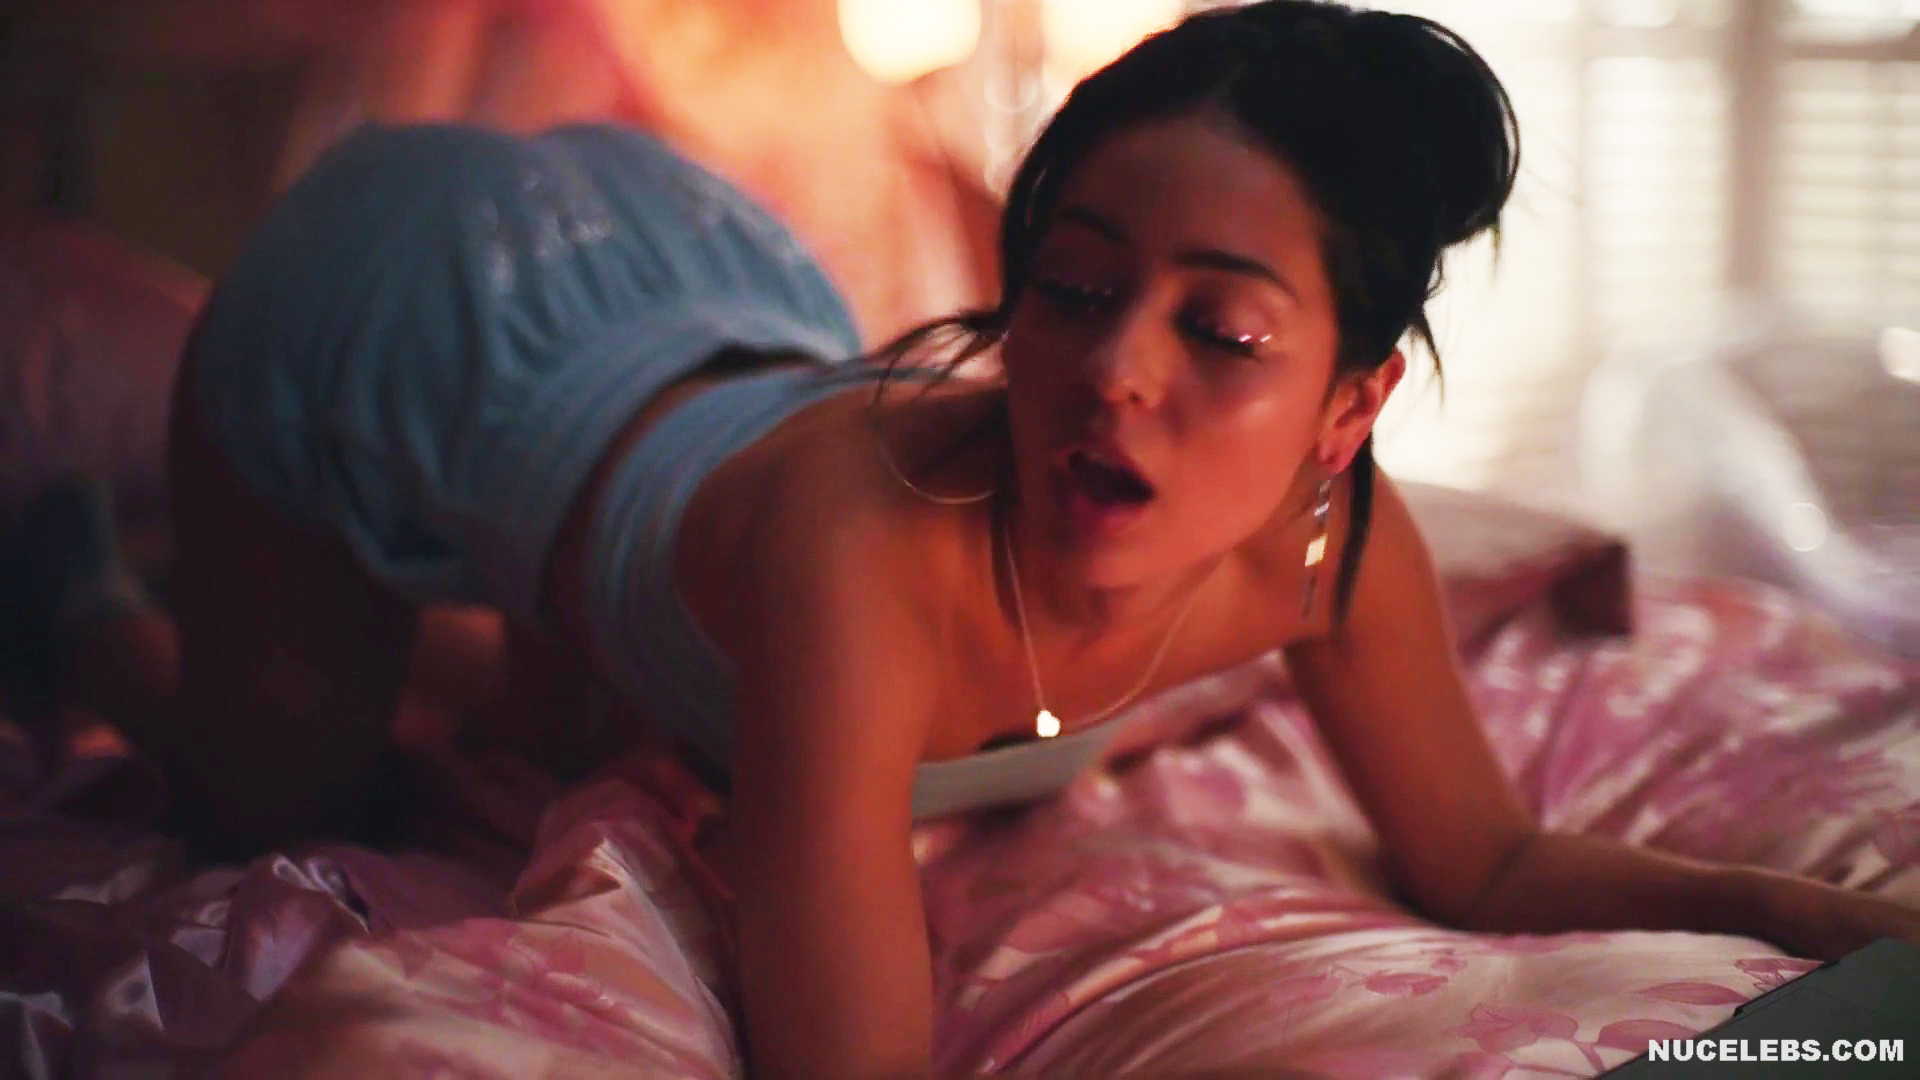 Alexa Demie will impress you with her acting in the sex scenes in Euphoria....